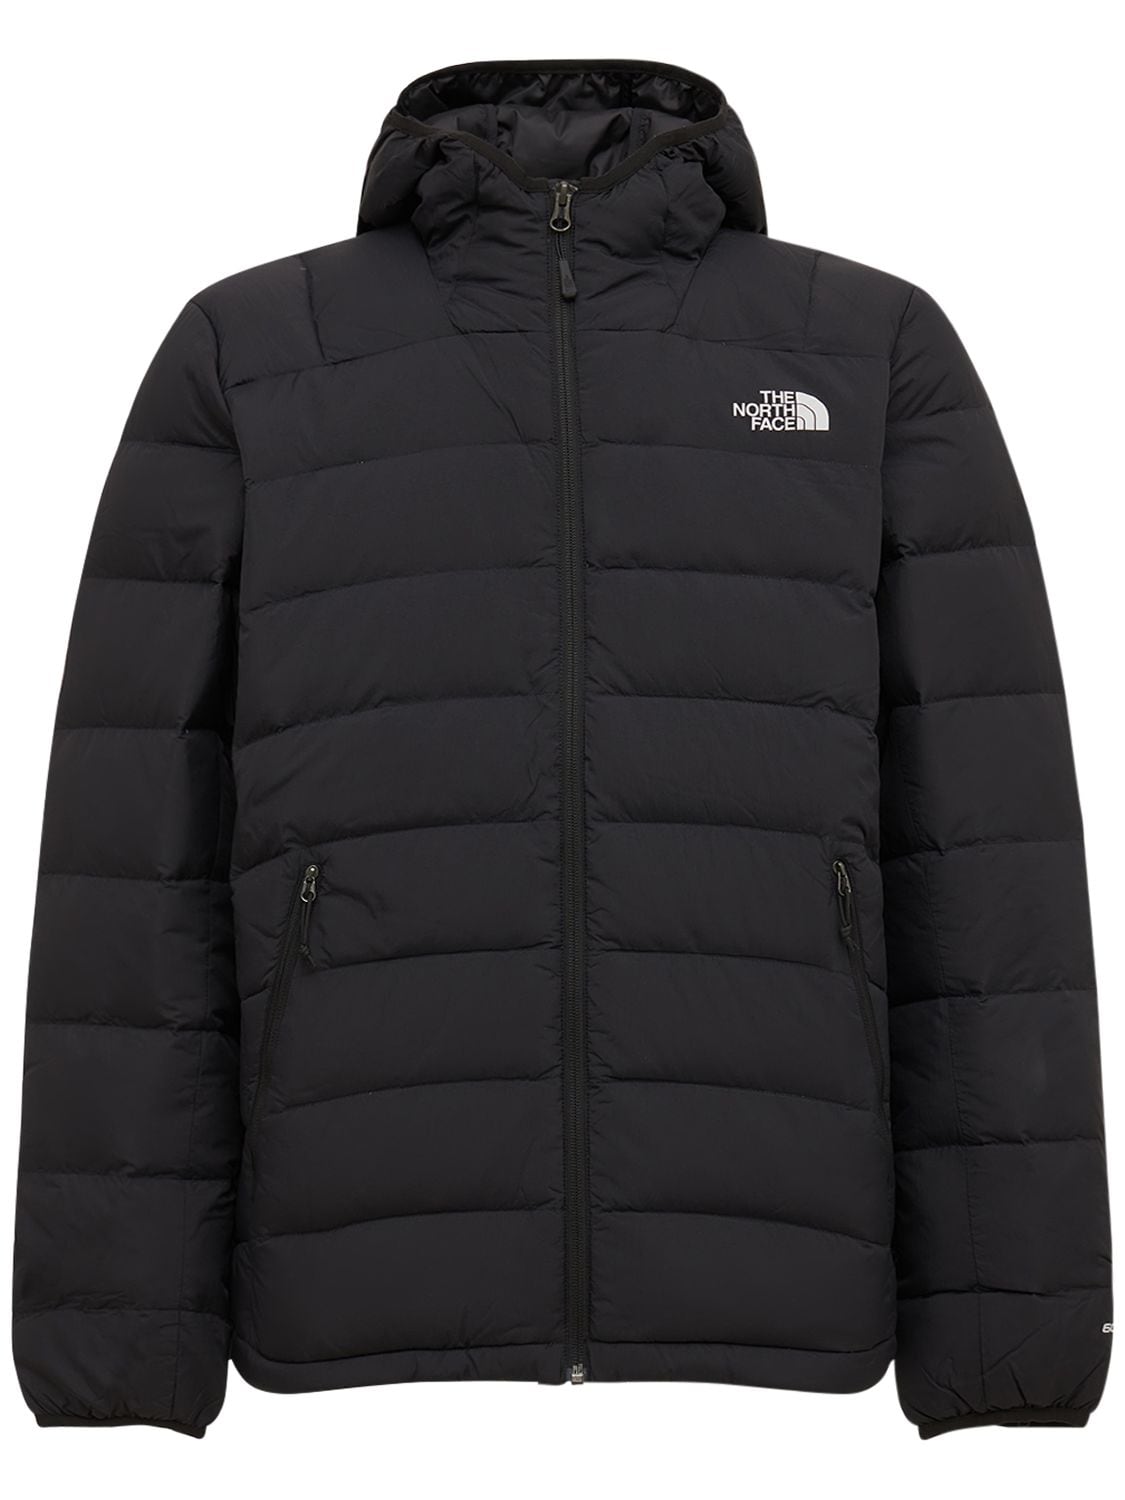 THE NORTH FACE Lapaz Hooded Down Jacket for Men